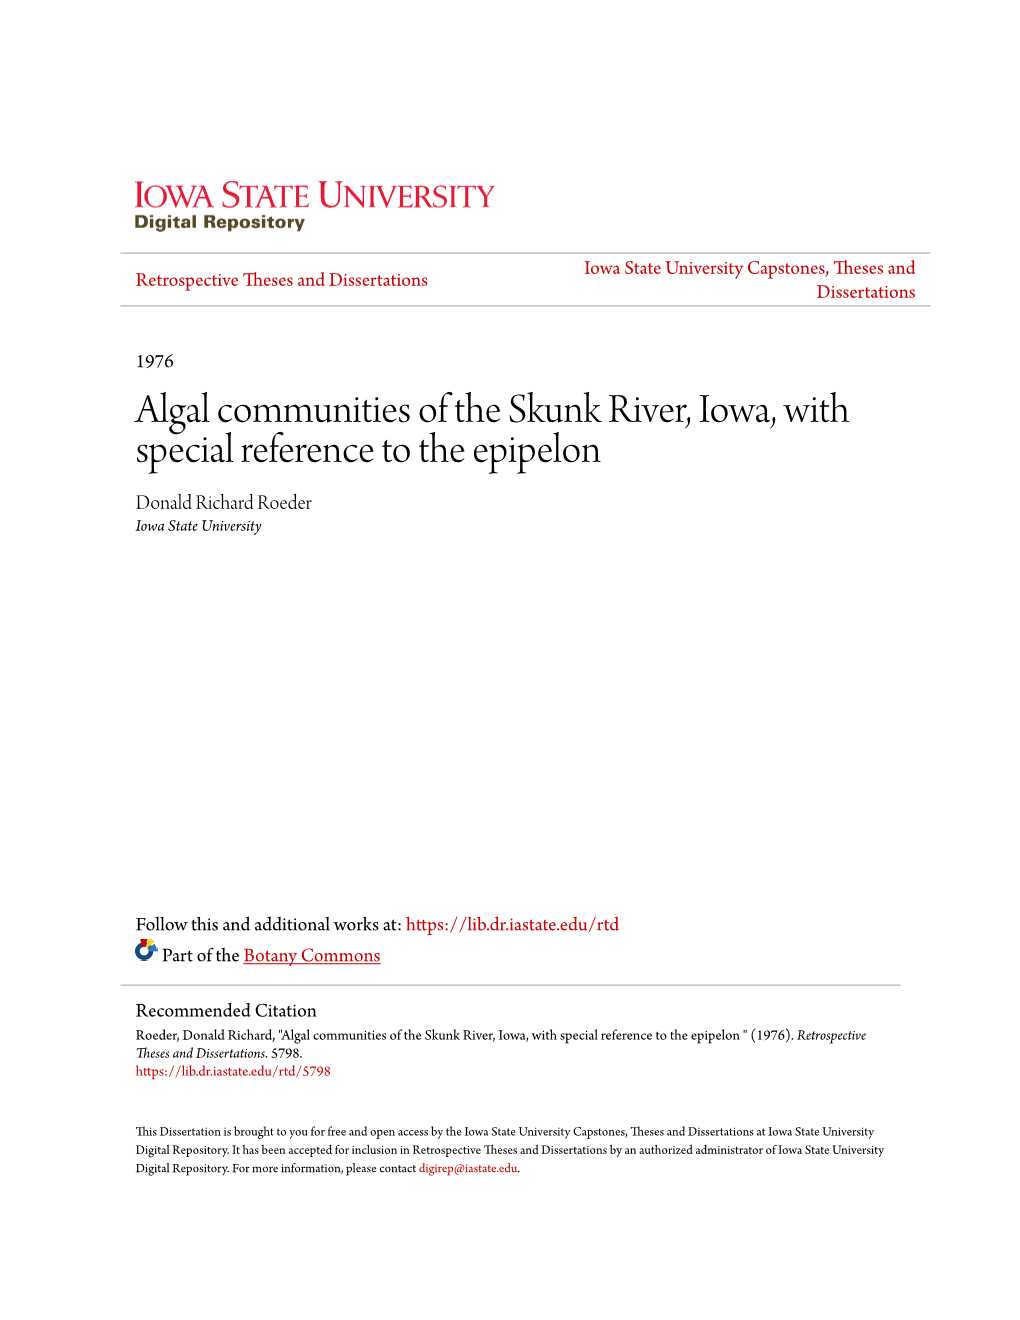 Algal Communities of the Skunk River, Iowa, with Special Reference to the Epipelon Donald Richard Roeder Iowa State University